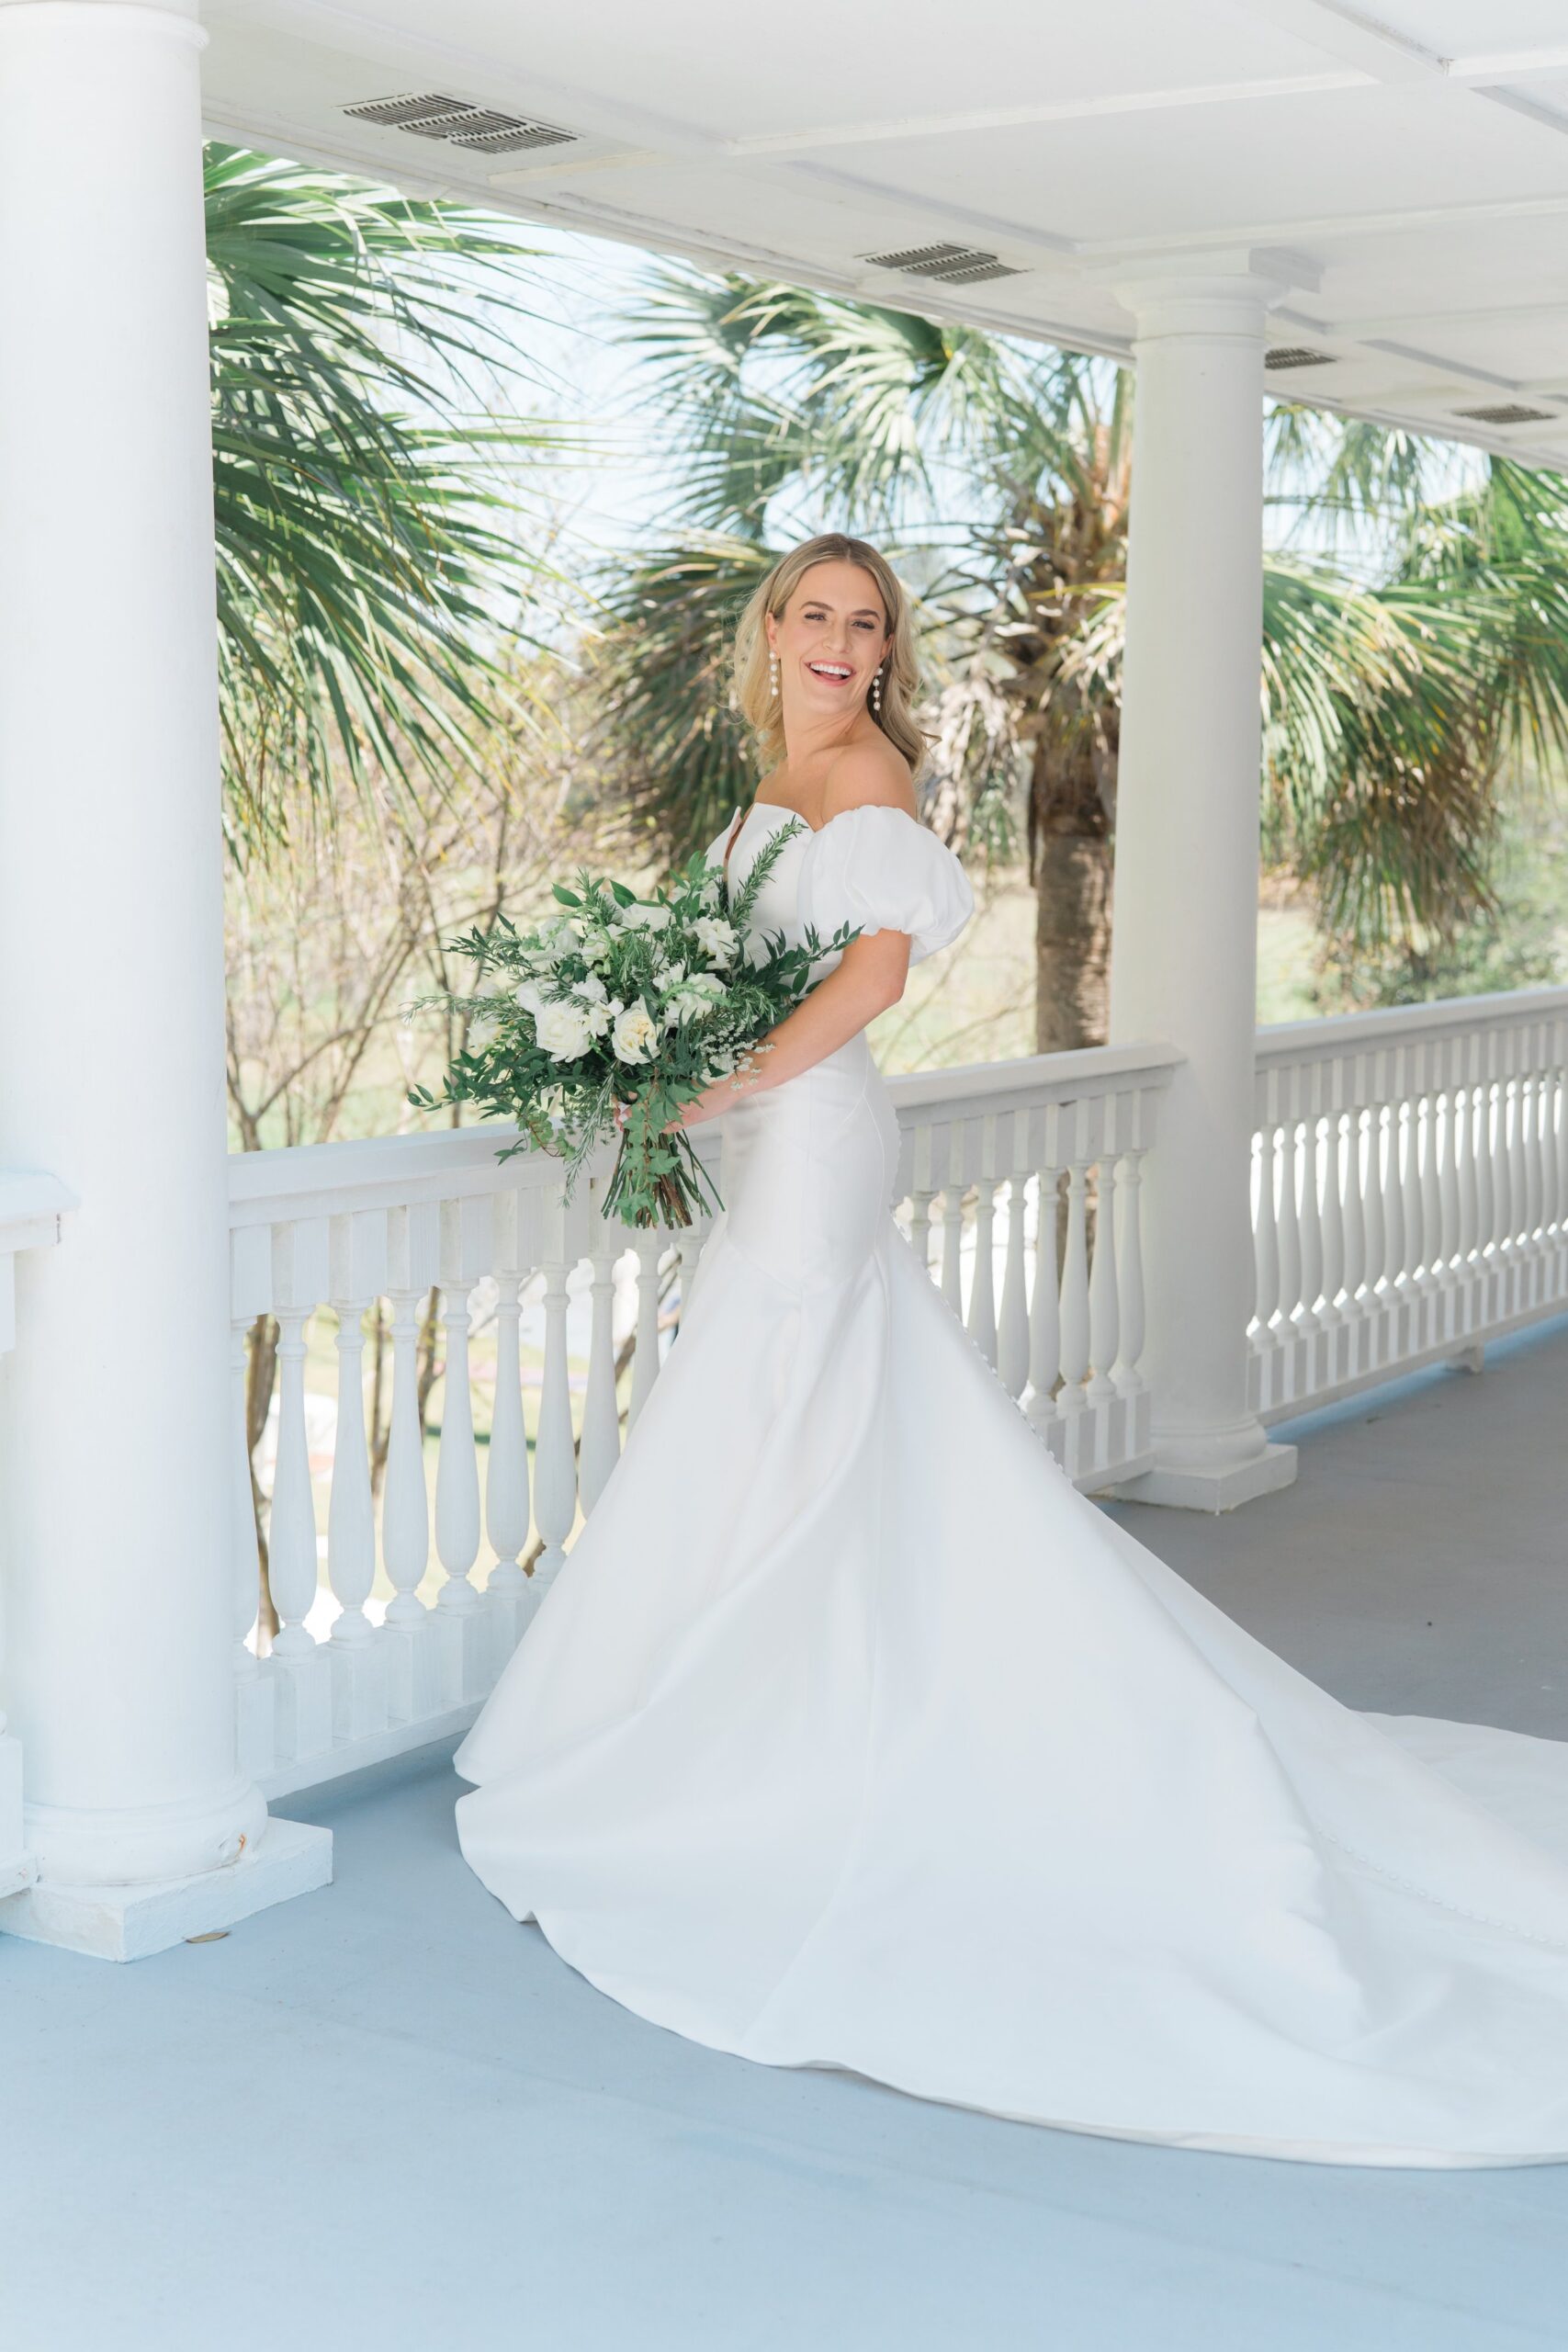 Charleston Spring bride with oversized flowers. White flowers and greenery. Palm trees and porches. Old wide awake.